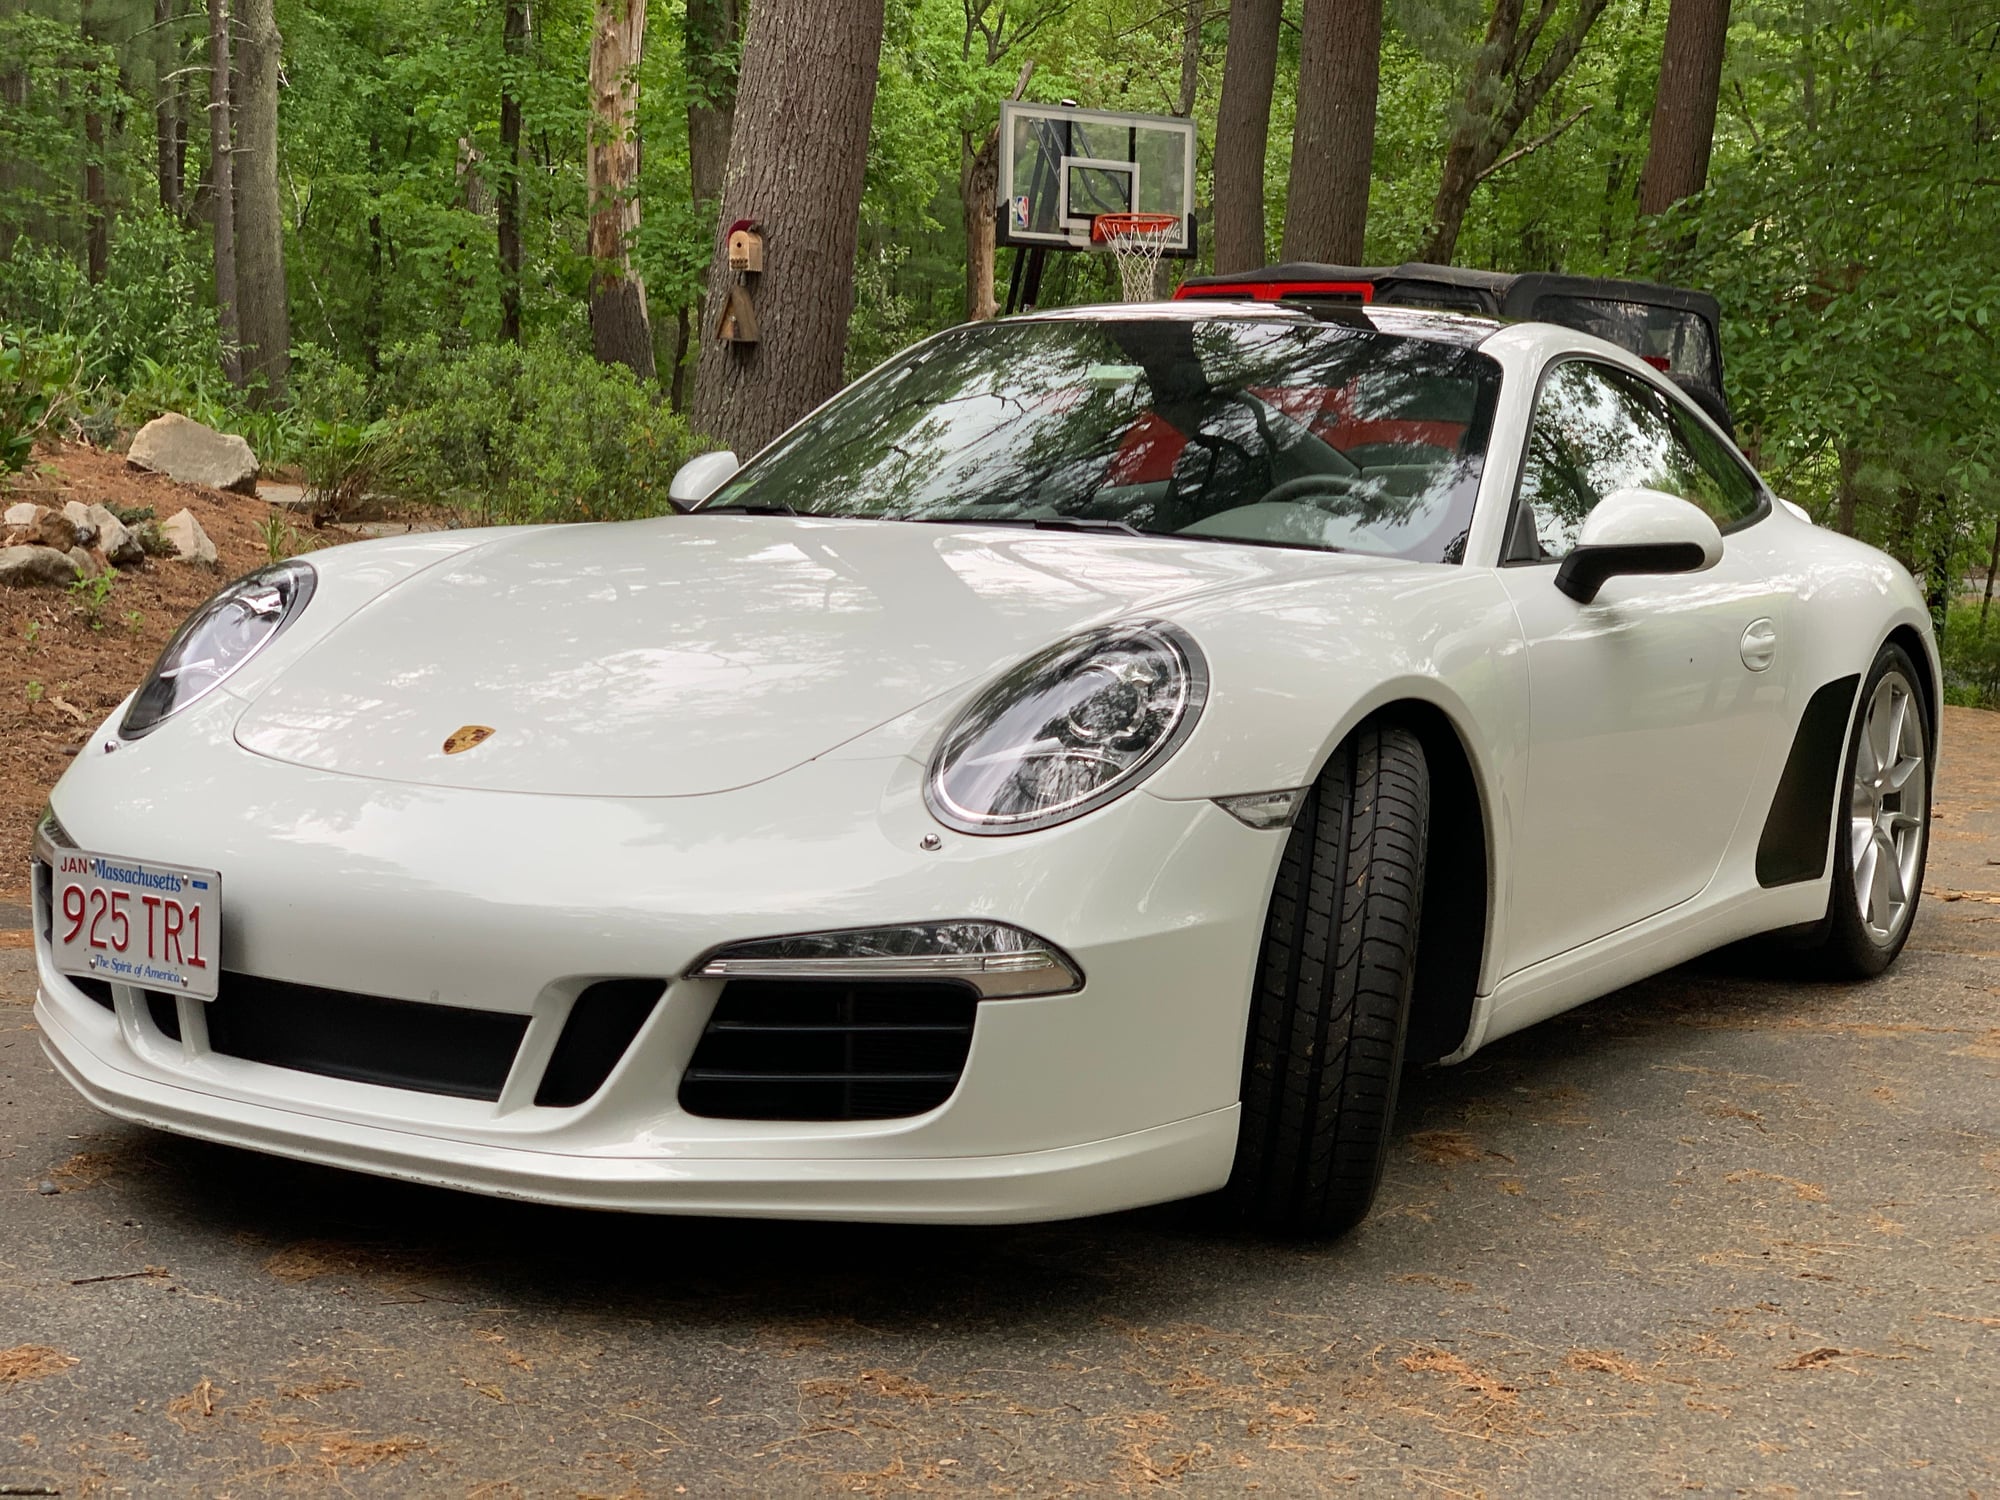 2013 Porsche 911 - 2013 911 C2S Manual, White w/Sport Kit Too! All New Rubber! WITH PICS NOW!!! - Used - VIN WPOAB2A96DS123240 - 24,000 Miles - 6 cyl - 2WD - Manual - Coupe - White - Concord, MA 01742, United States